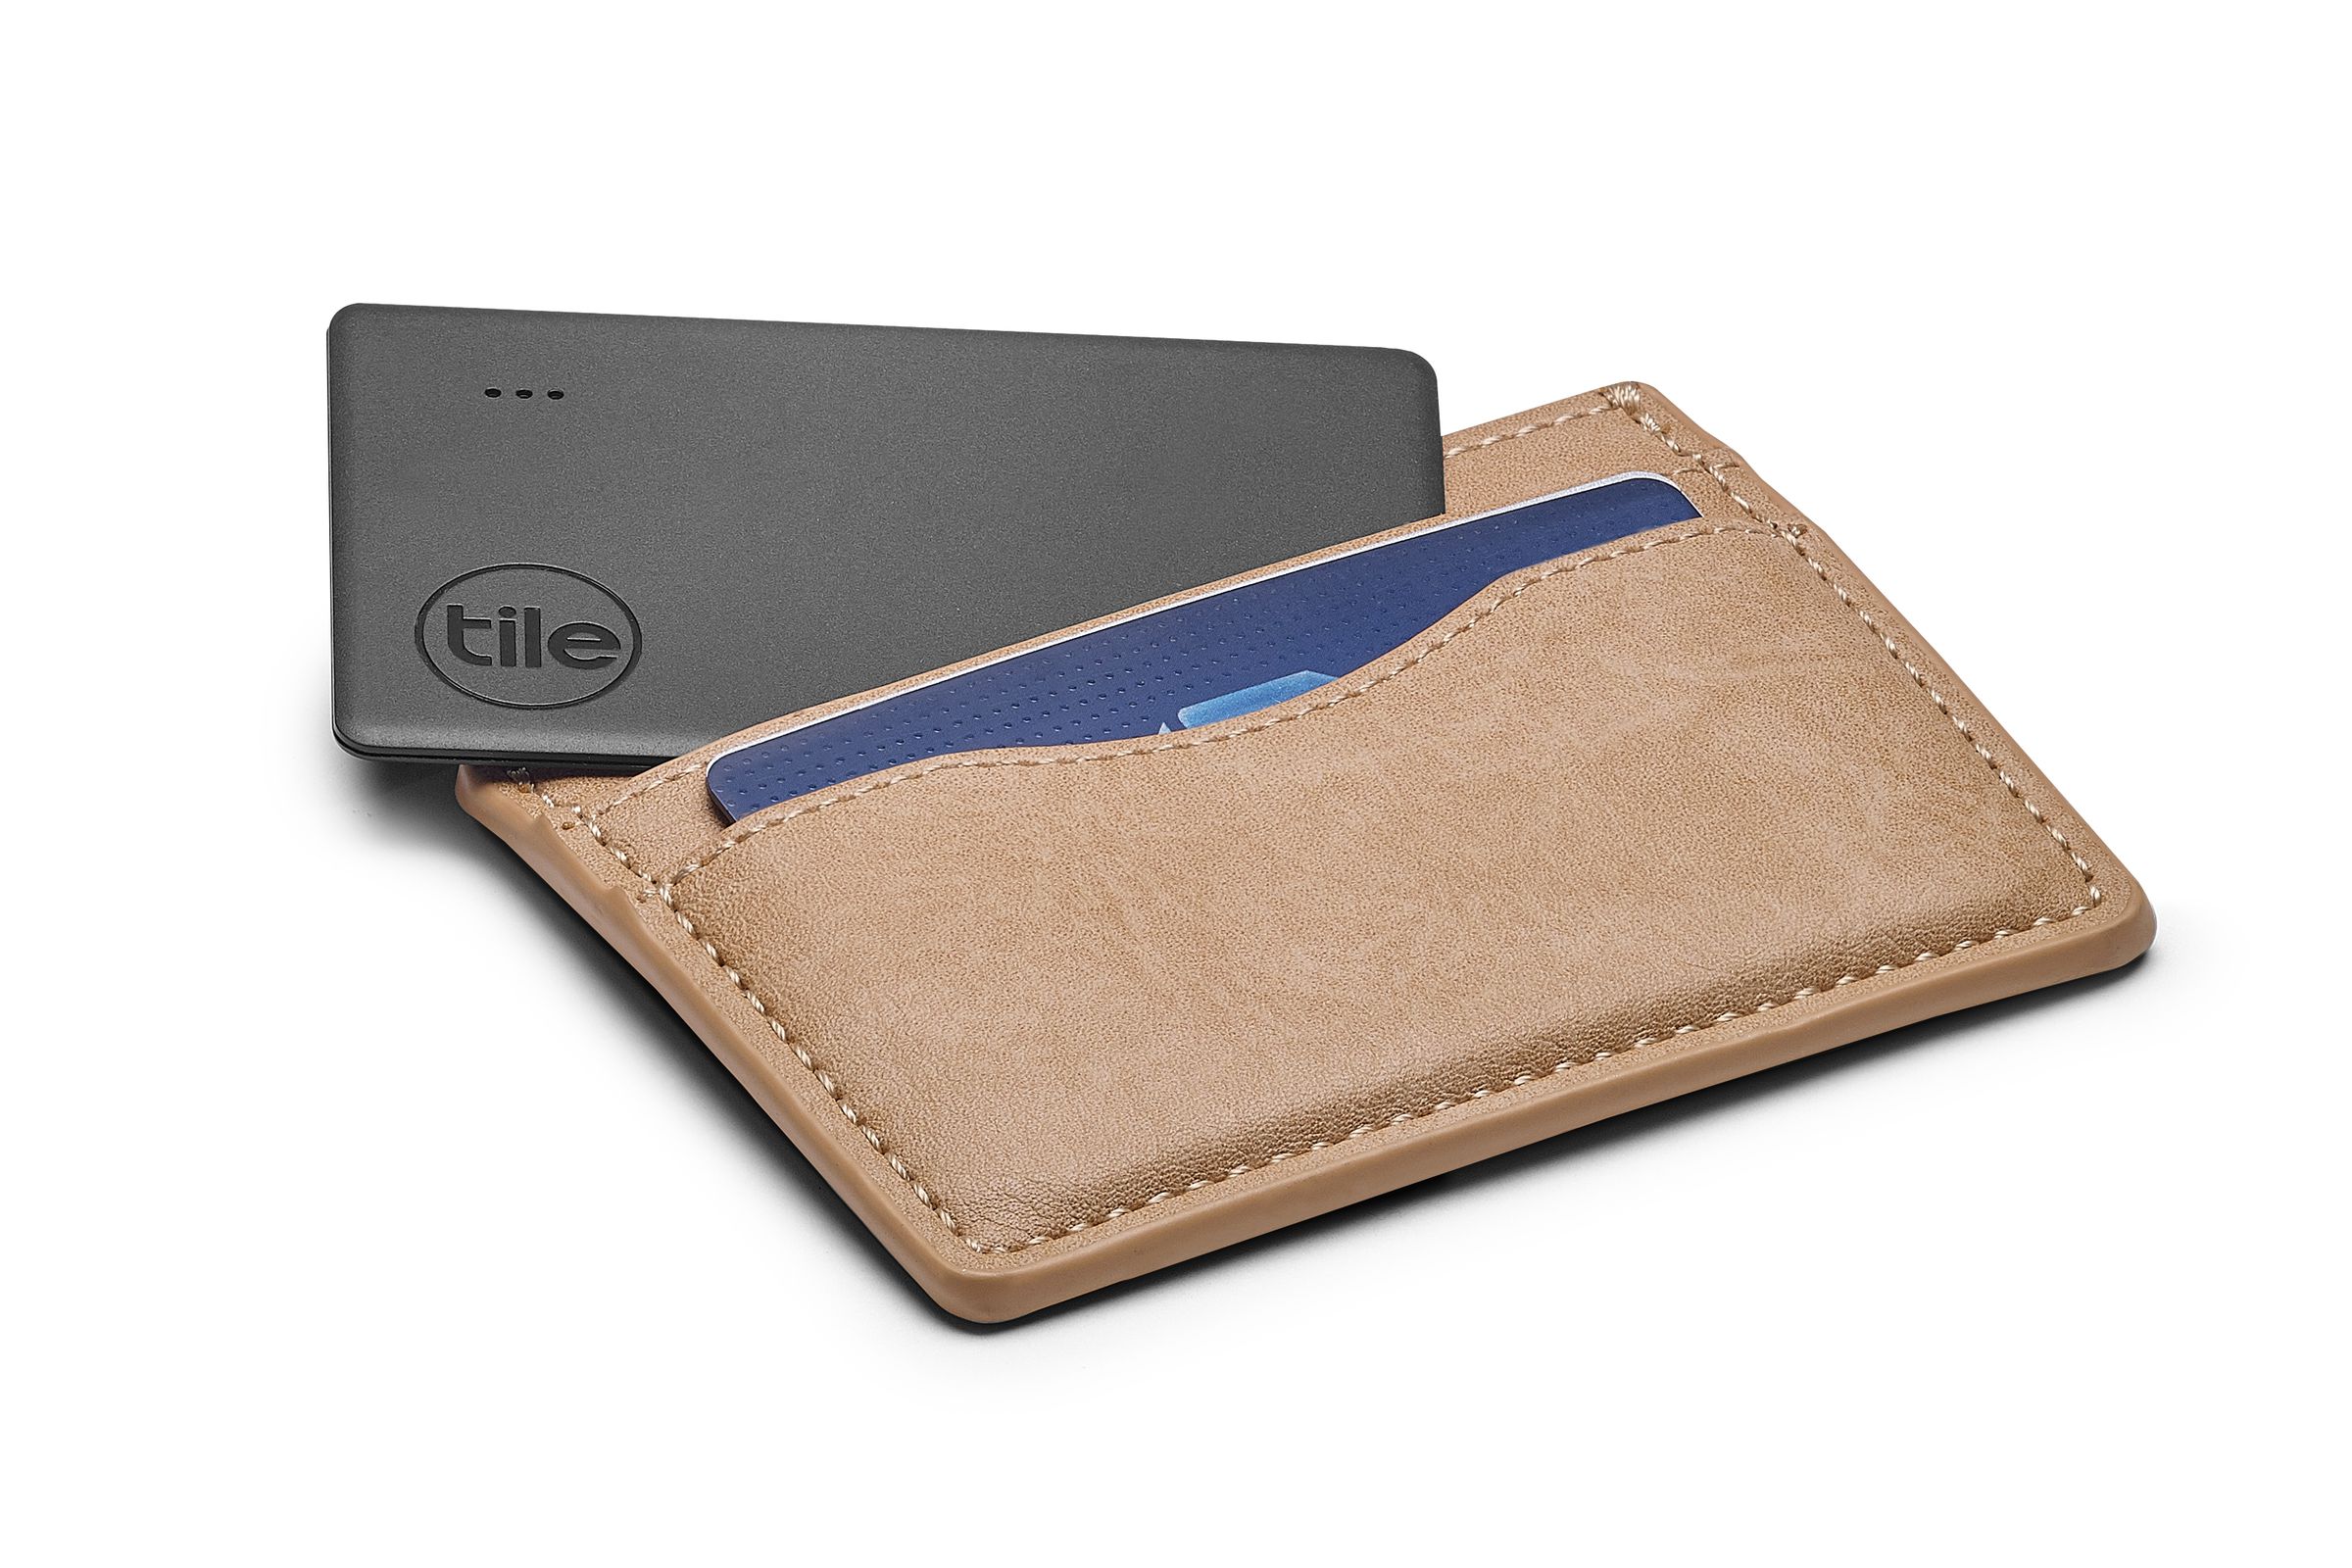 The Tile Slim has the same dimensions as roughly three credit cards stacked on top of one another.